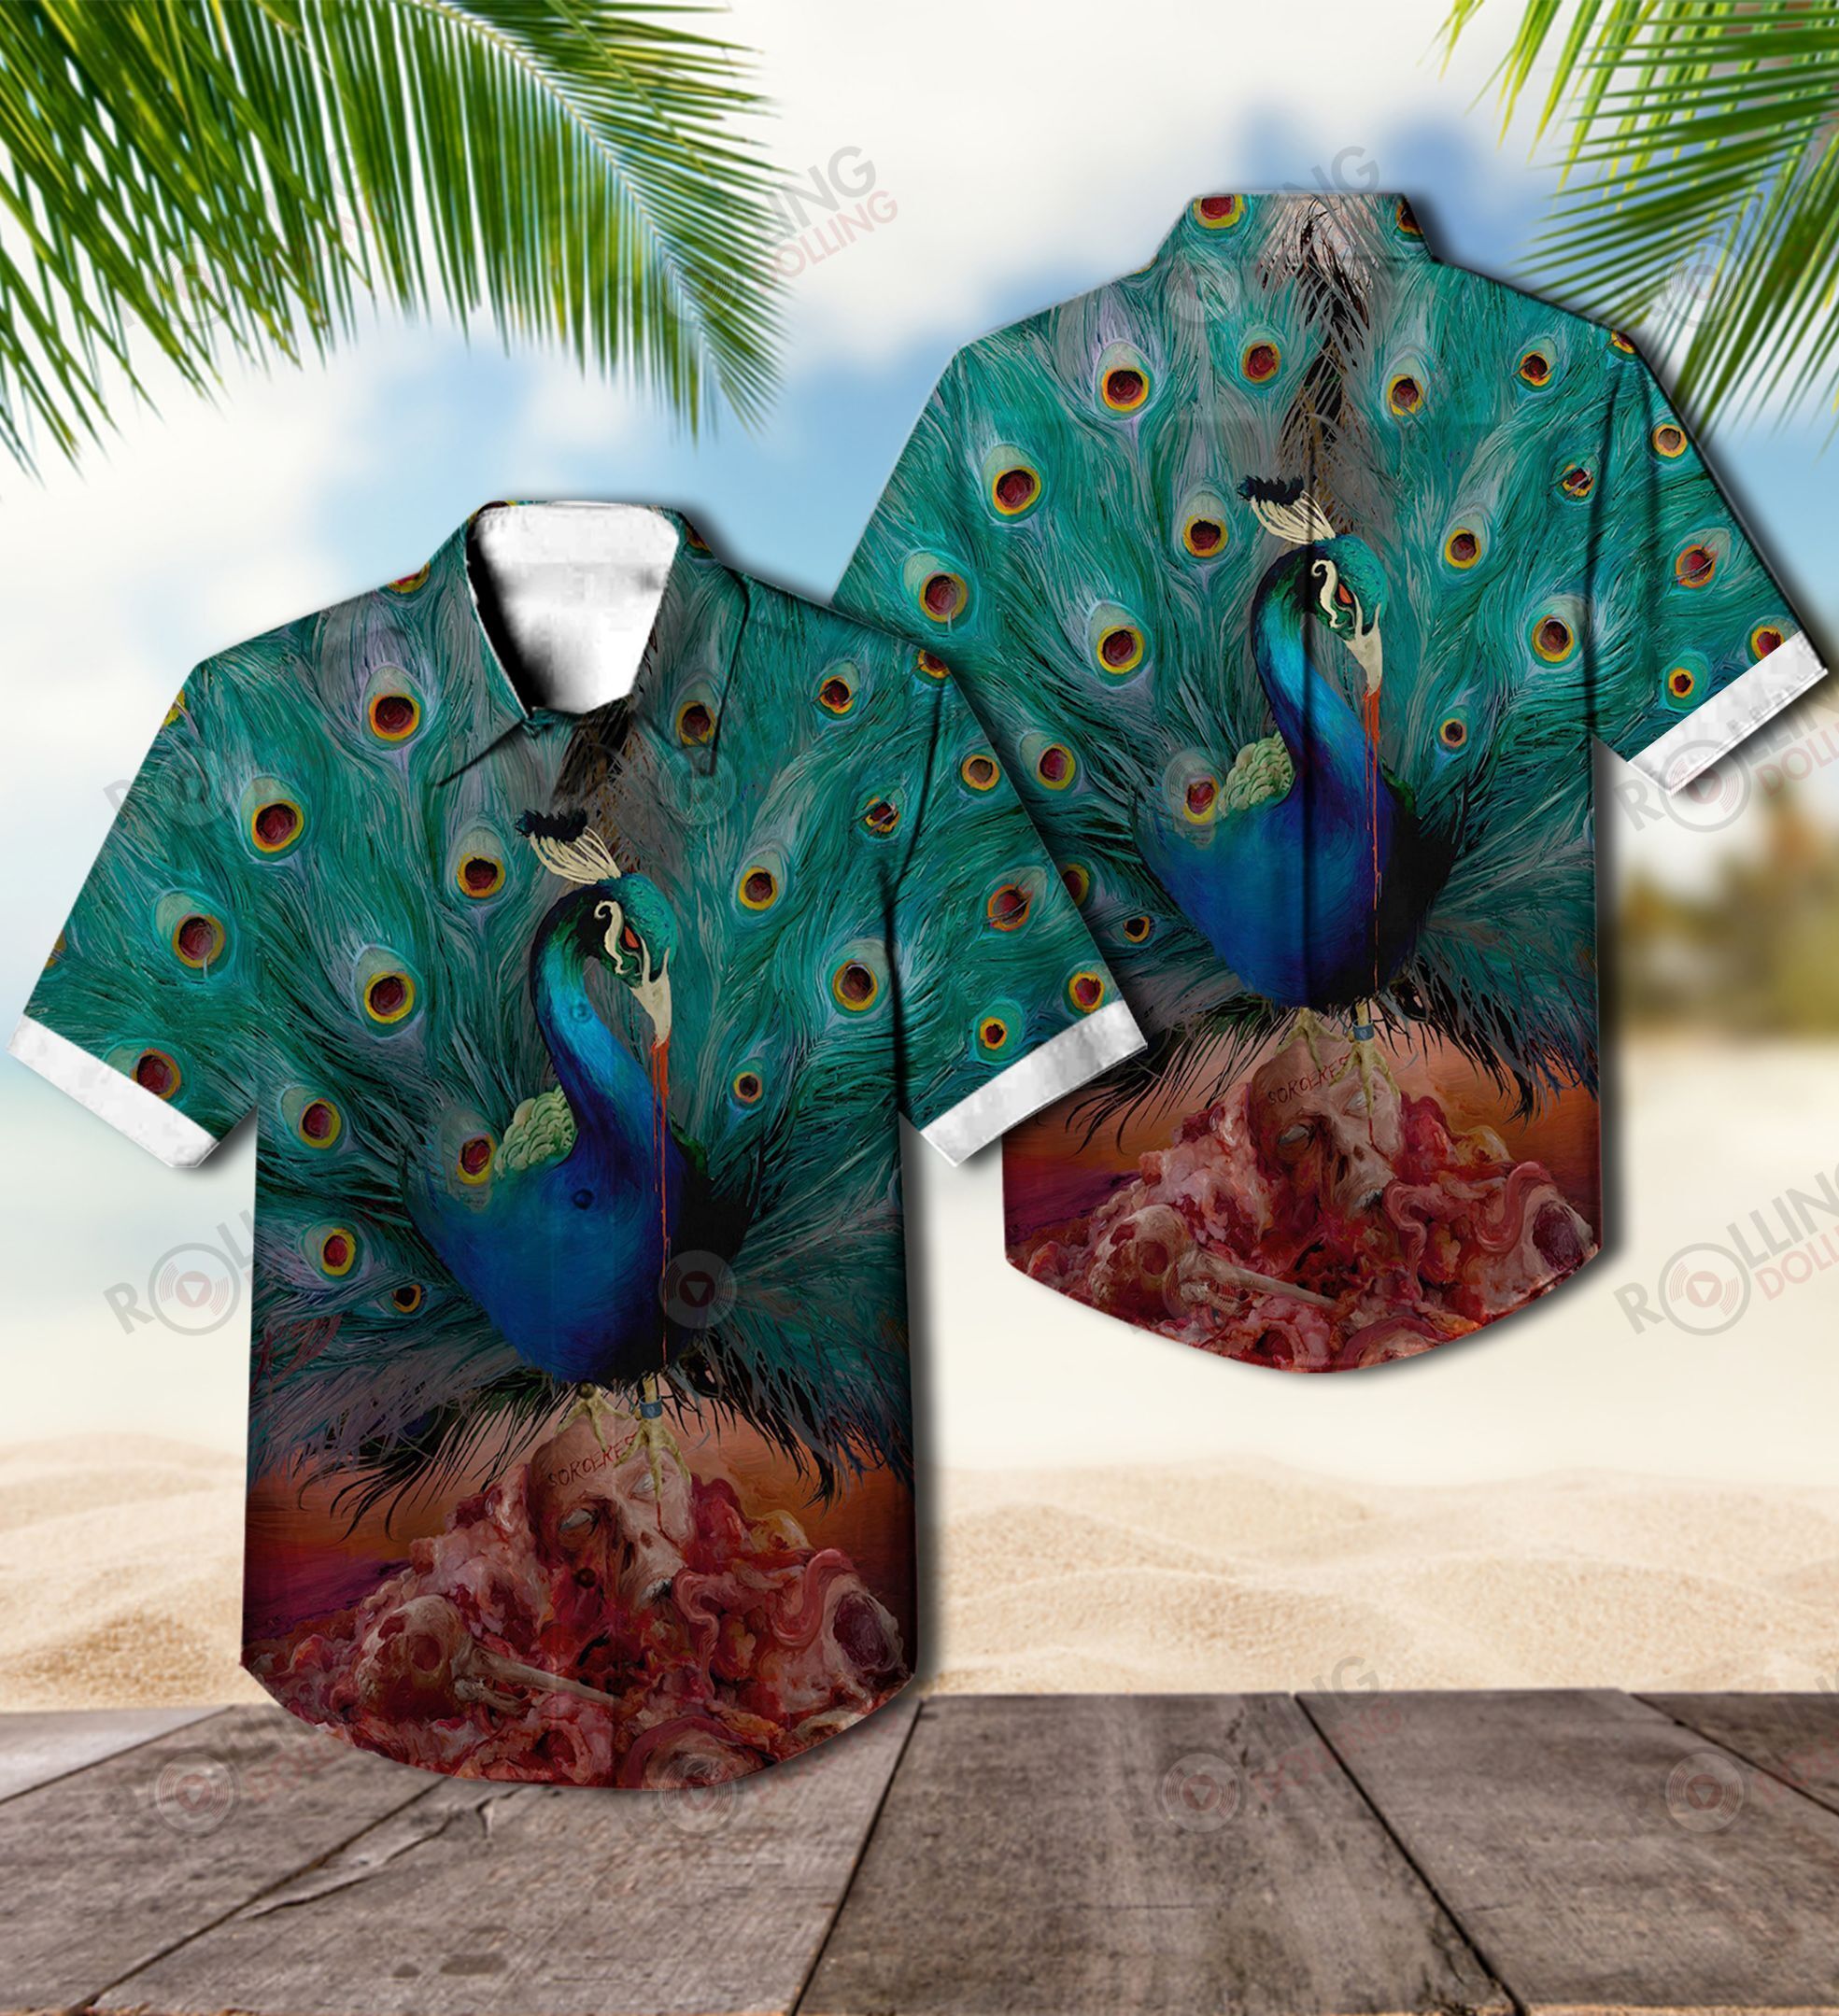 You'll have the perfect vacation outfit with this Hawaiian shirt 259